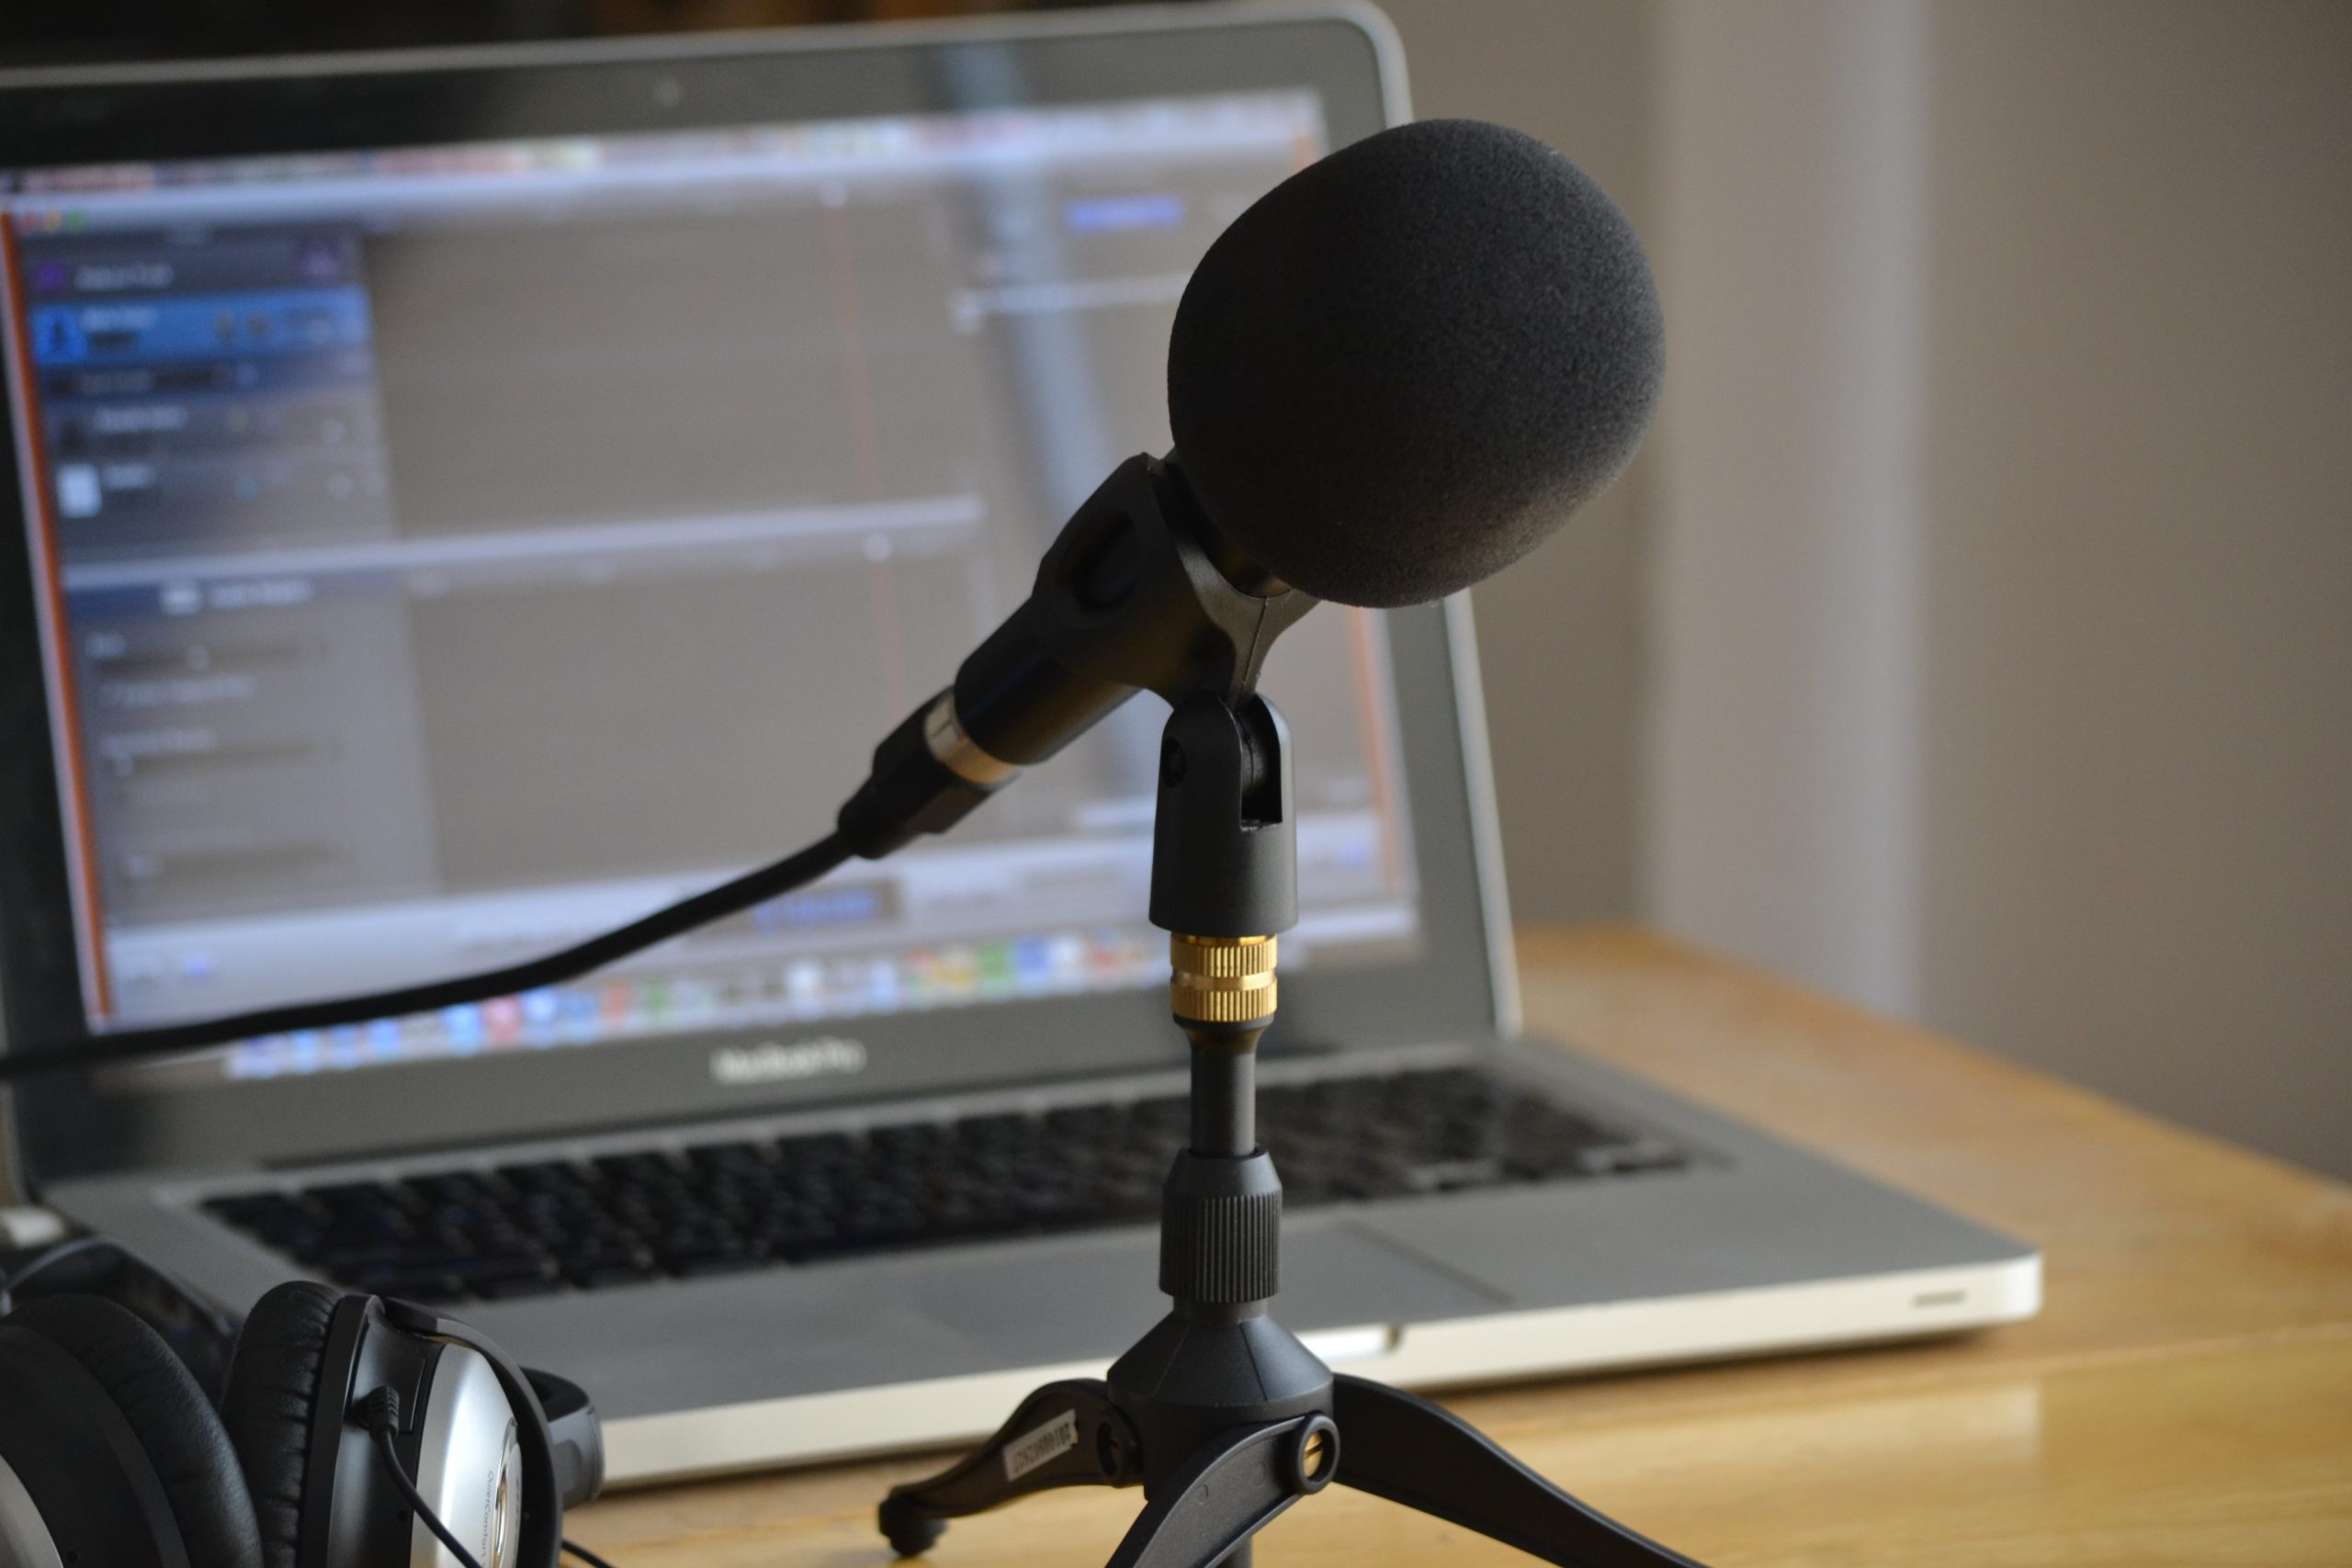 Podcasting setup with a microphone and laptop